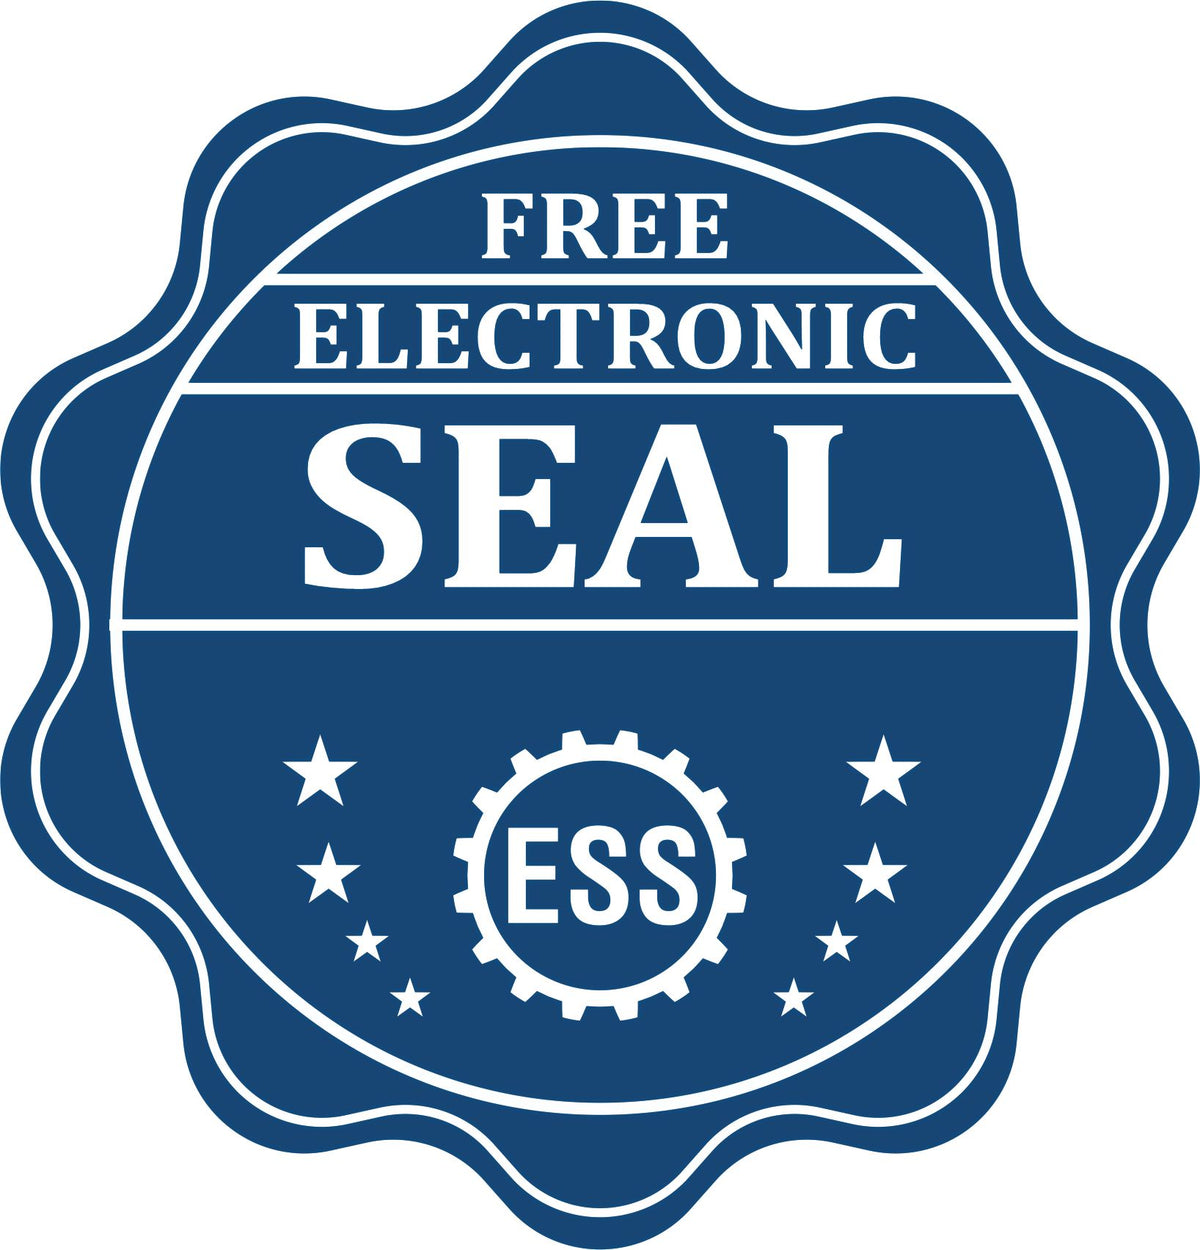 A badge showing a free electronic seal for the Premium MaxLight Pre-Inked Delaware Geology Stamp with stars and the ESS gear on the emblem.